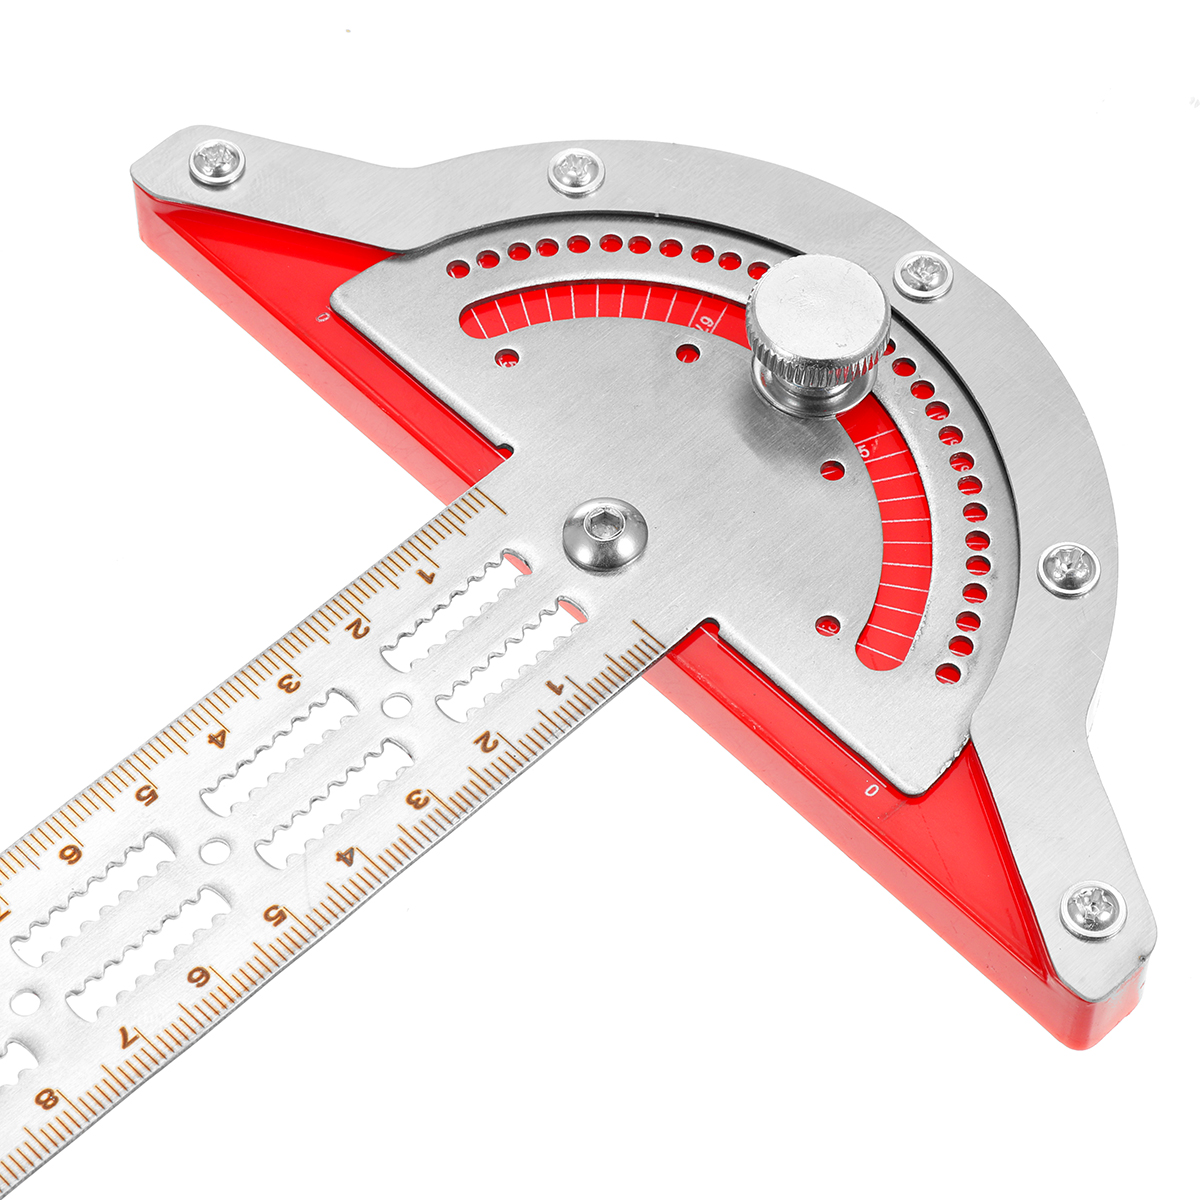 Stainless-Steel-Edge-Ruler-Protractor-Woodworking-Ruler-Angle-Measuring-Tool-Precision-Carpenter-Too-1923789-11